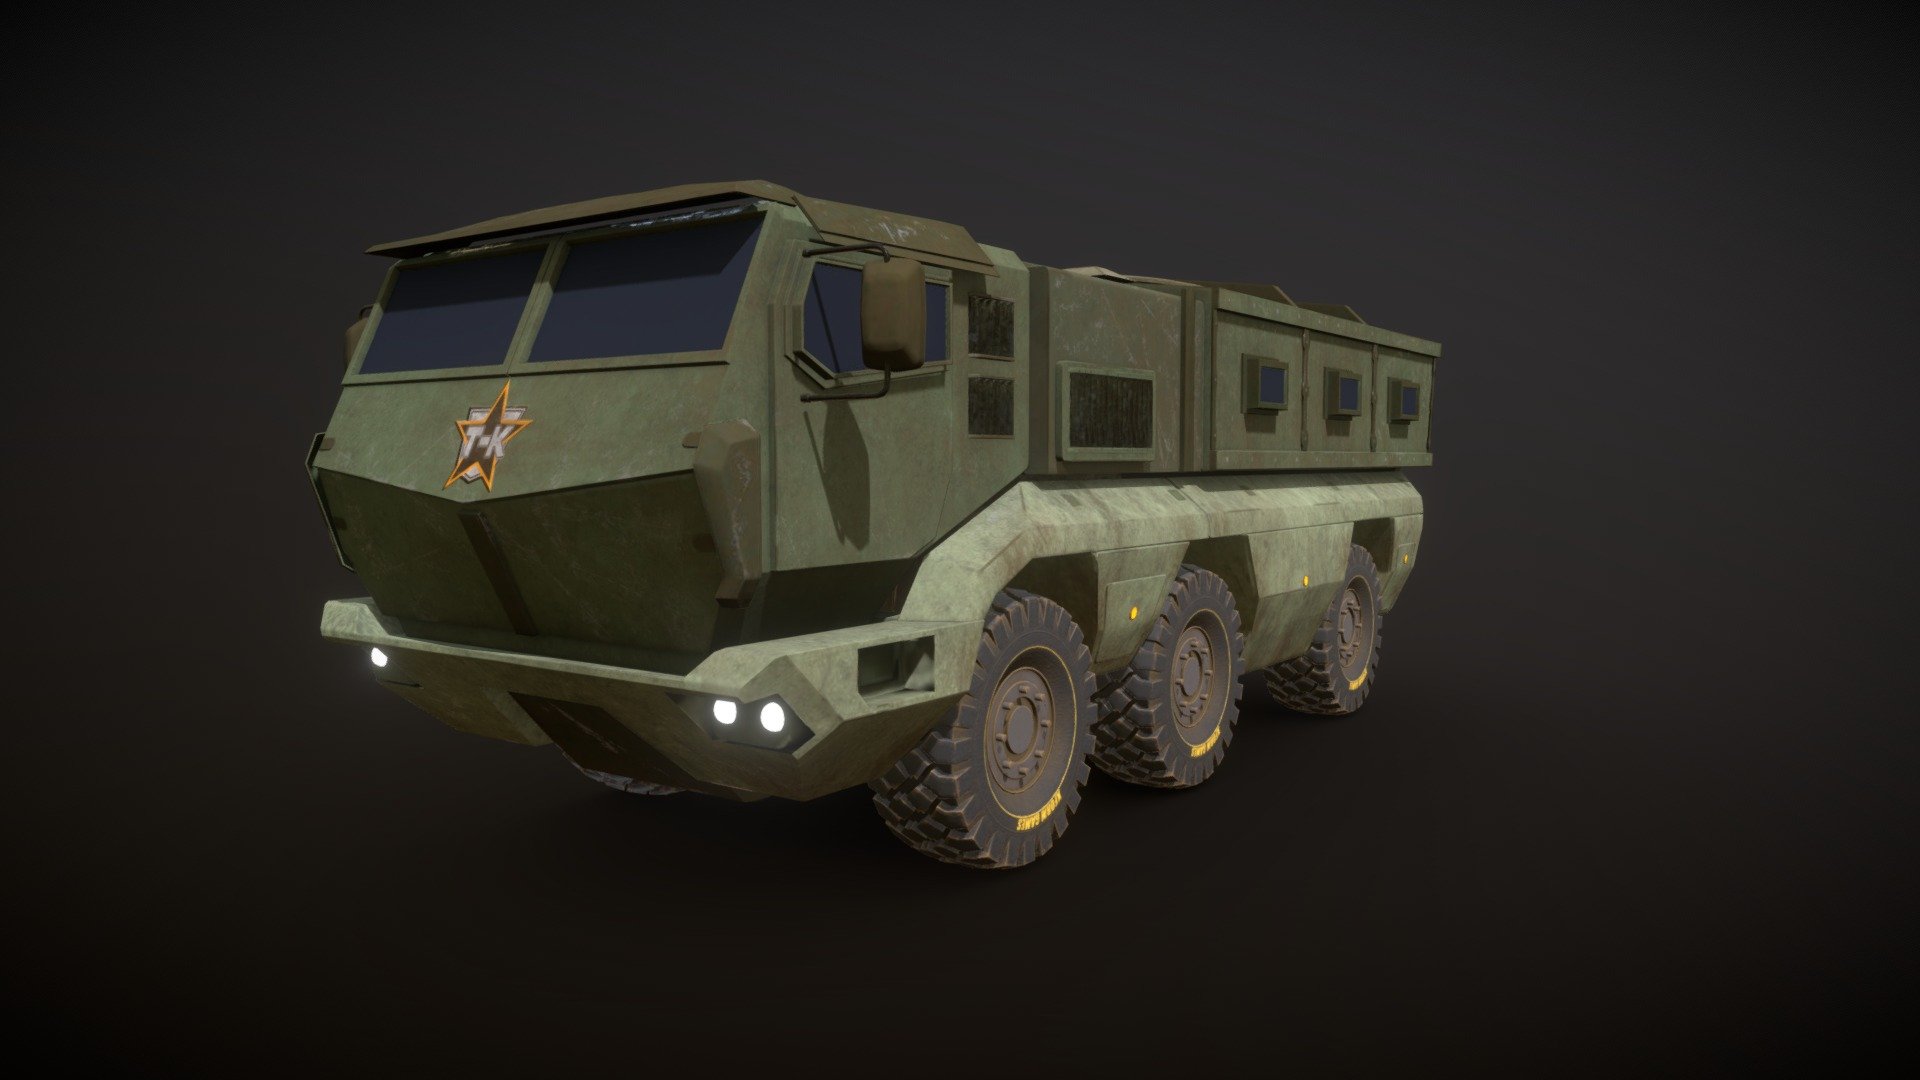 Russian Kamaz Typhoon made as a game ready asset, during my internship at XForm Games.

This model was modelled with Blender and textured with Substance Painter 3d model